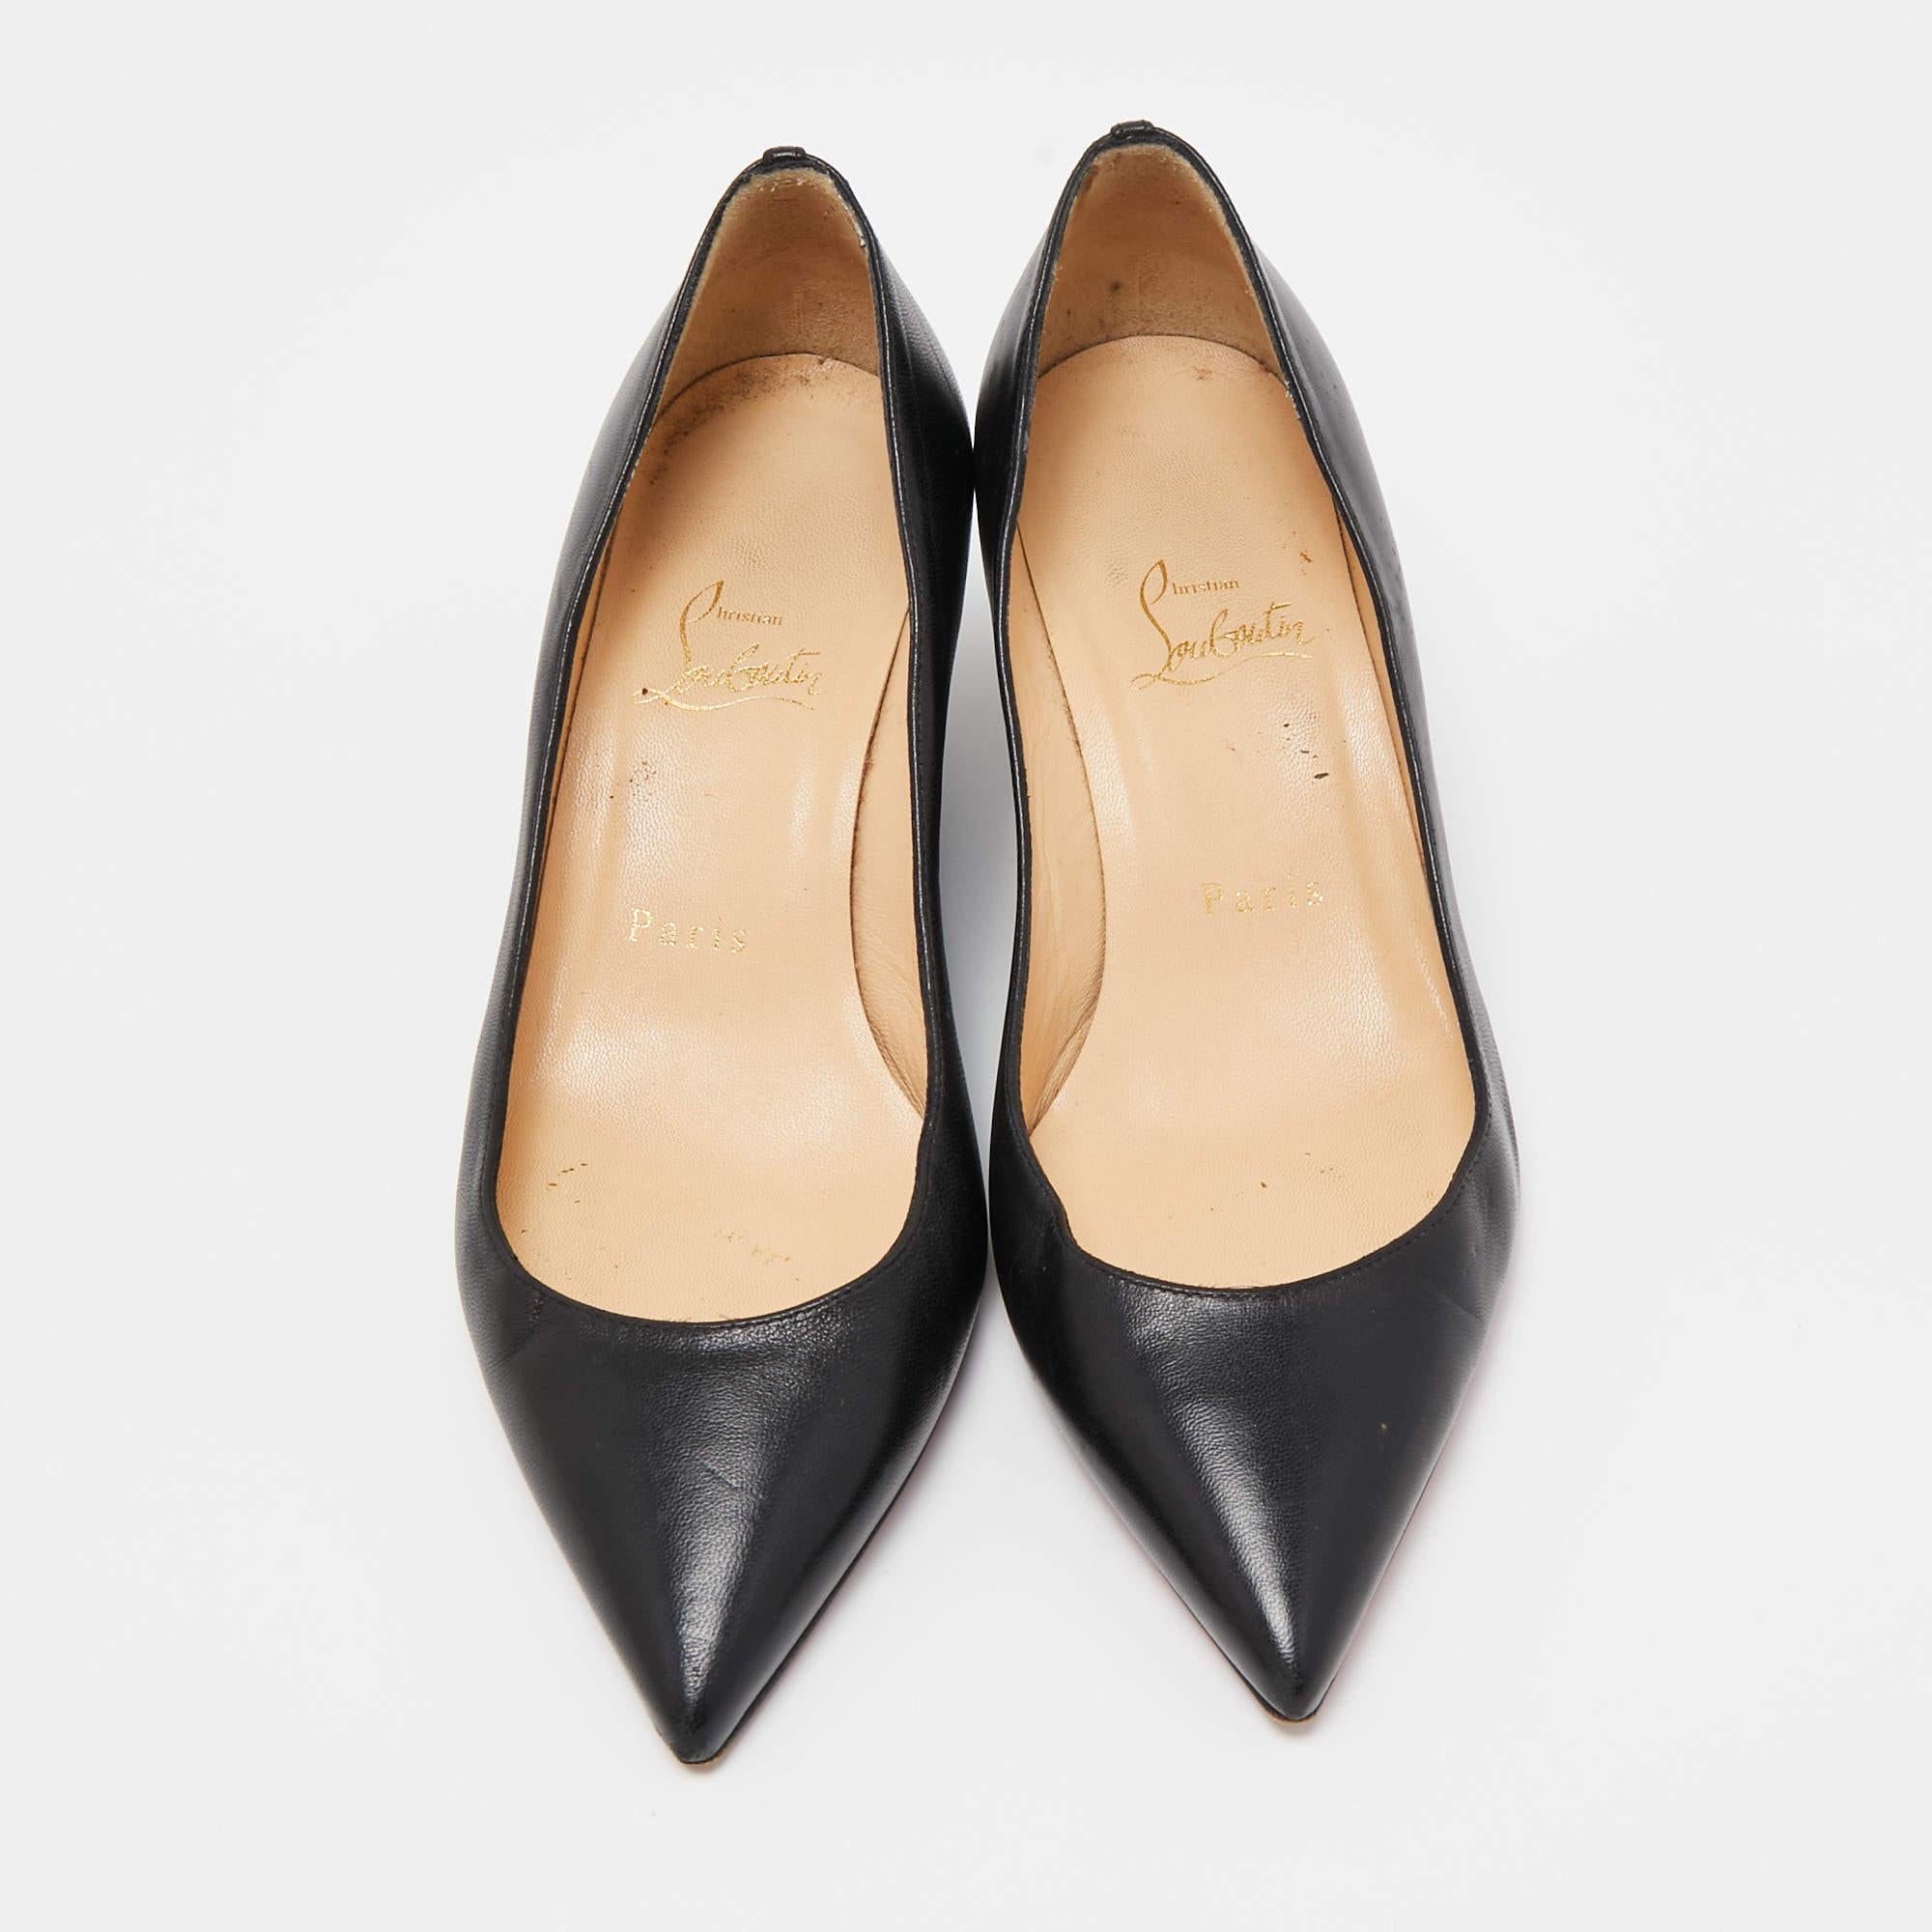 Christian Louboutin Black Leather Pointed Toe Wedge Pumps Size 37.5 In Good Condition For Sale In Dubai, Al Qouz 2